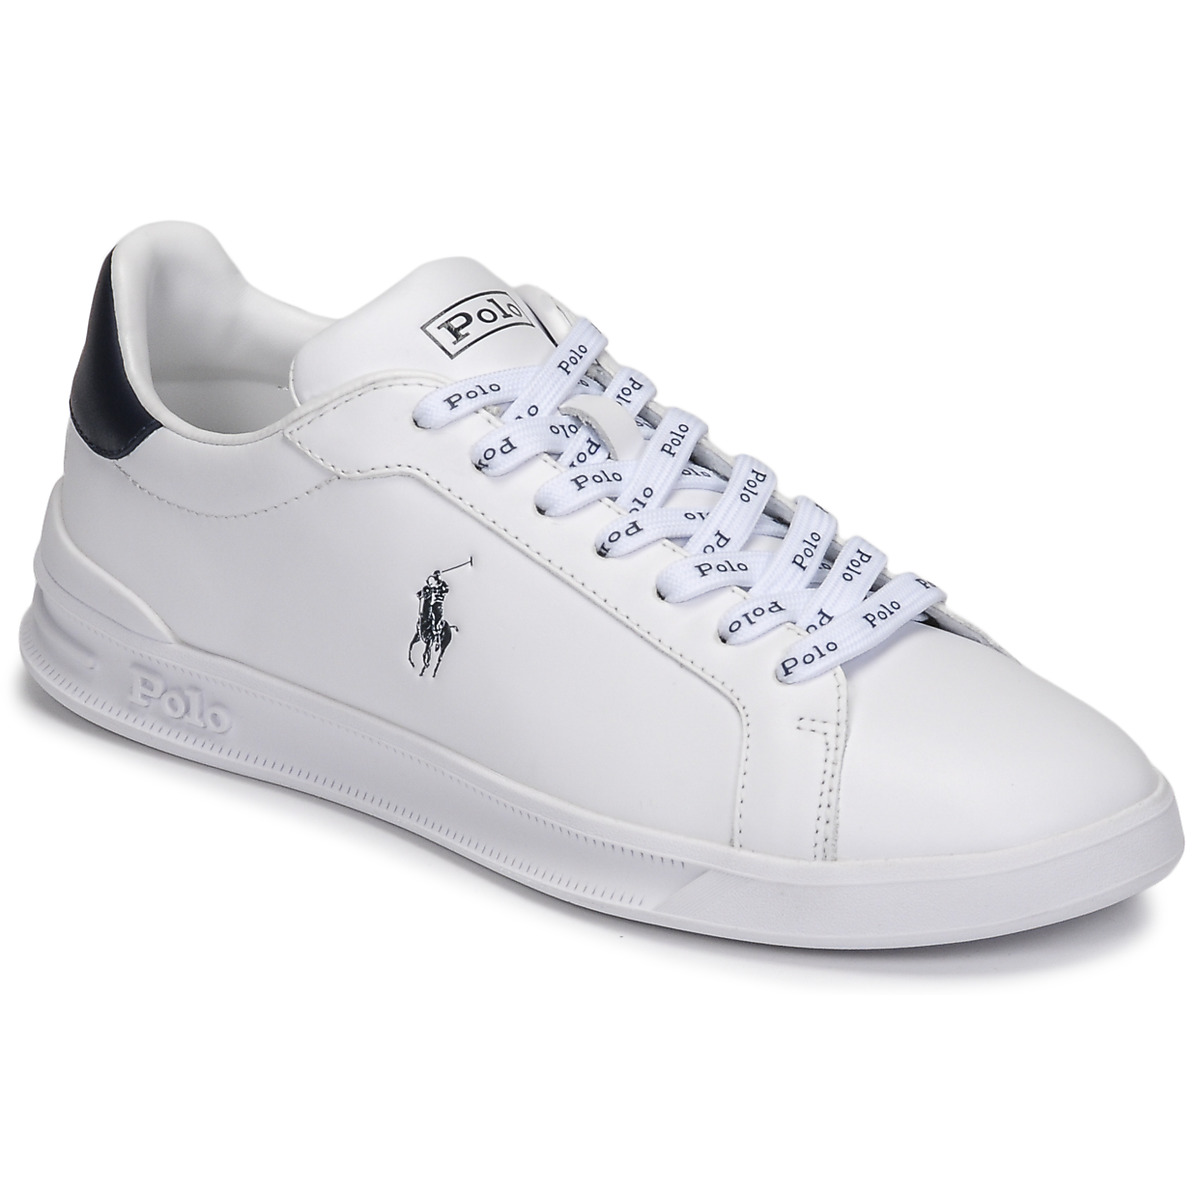 ralph lauren shoes myer,Save up to 16%,www.ilcascinone.com